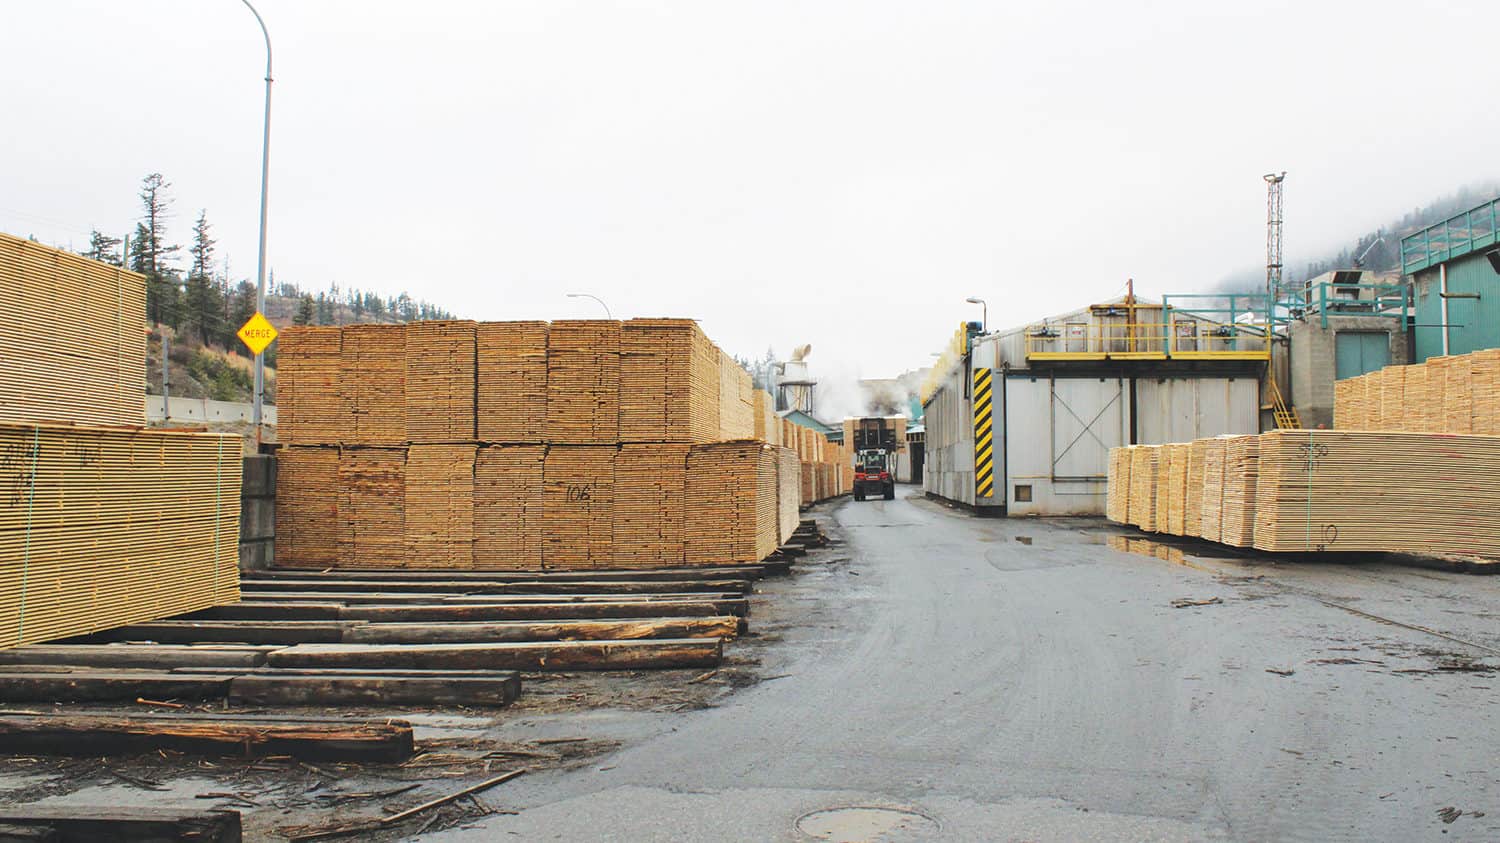 Gorman Brothers Lumber: From Fruit Boxes to a Global Softwood Market 8